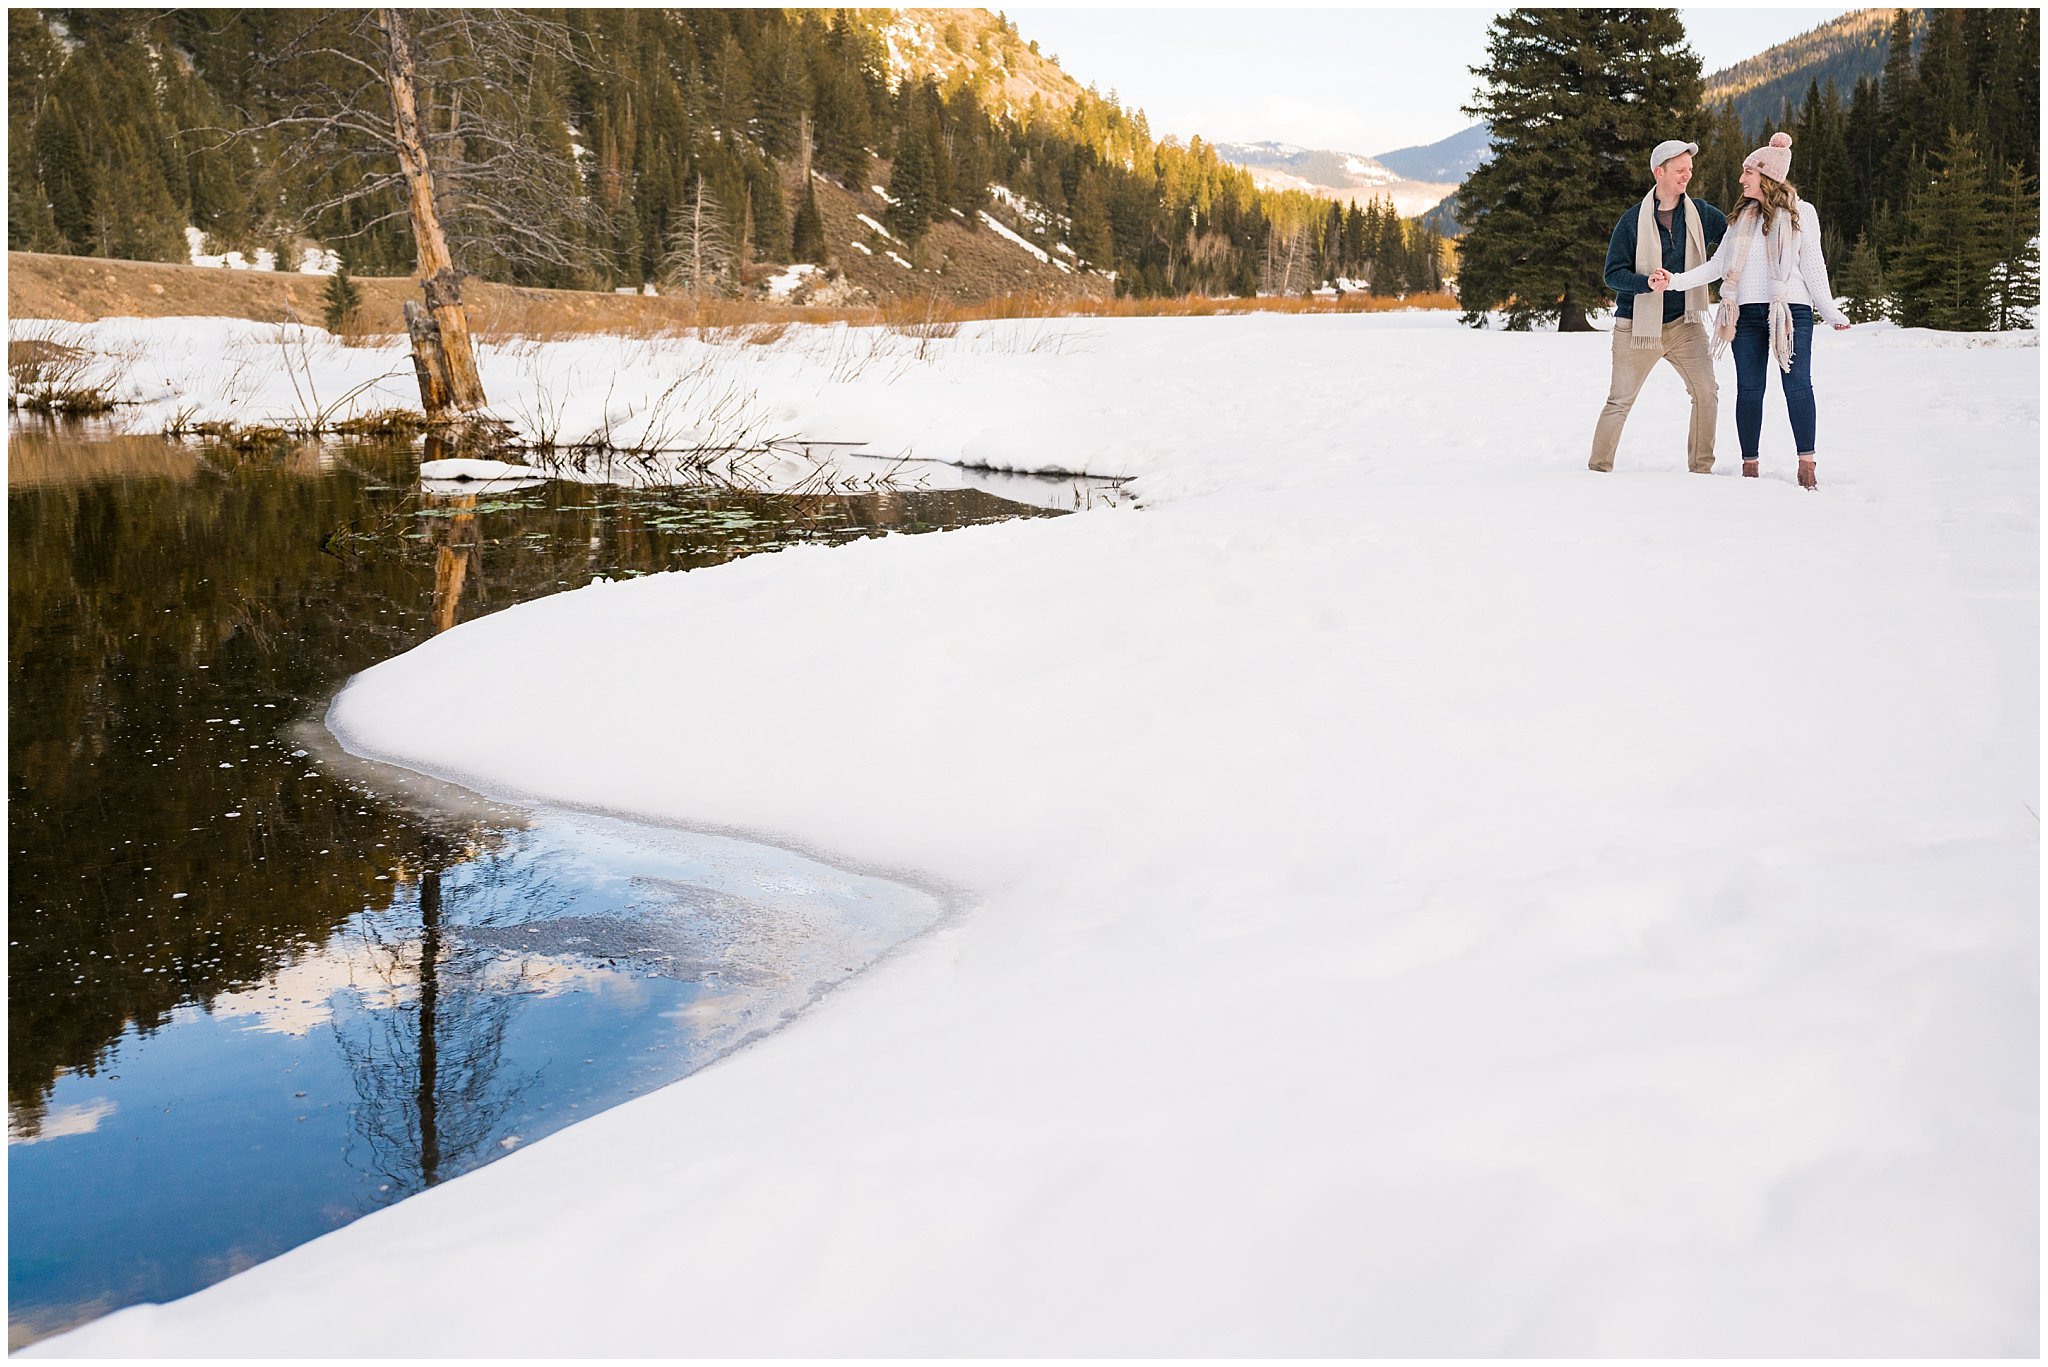 Couple in cute winter outfits sharing candid moments in the Utah mountains in the snow | Big Cottonwood Canyon Winter Engagement Session | Jessie and Dallin Photography